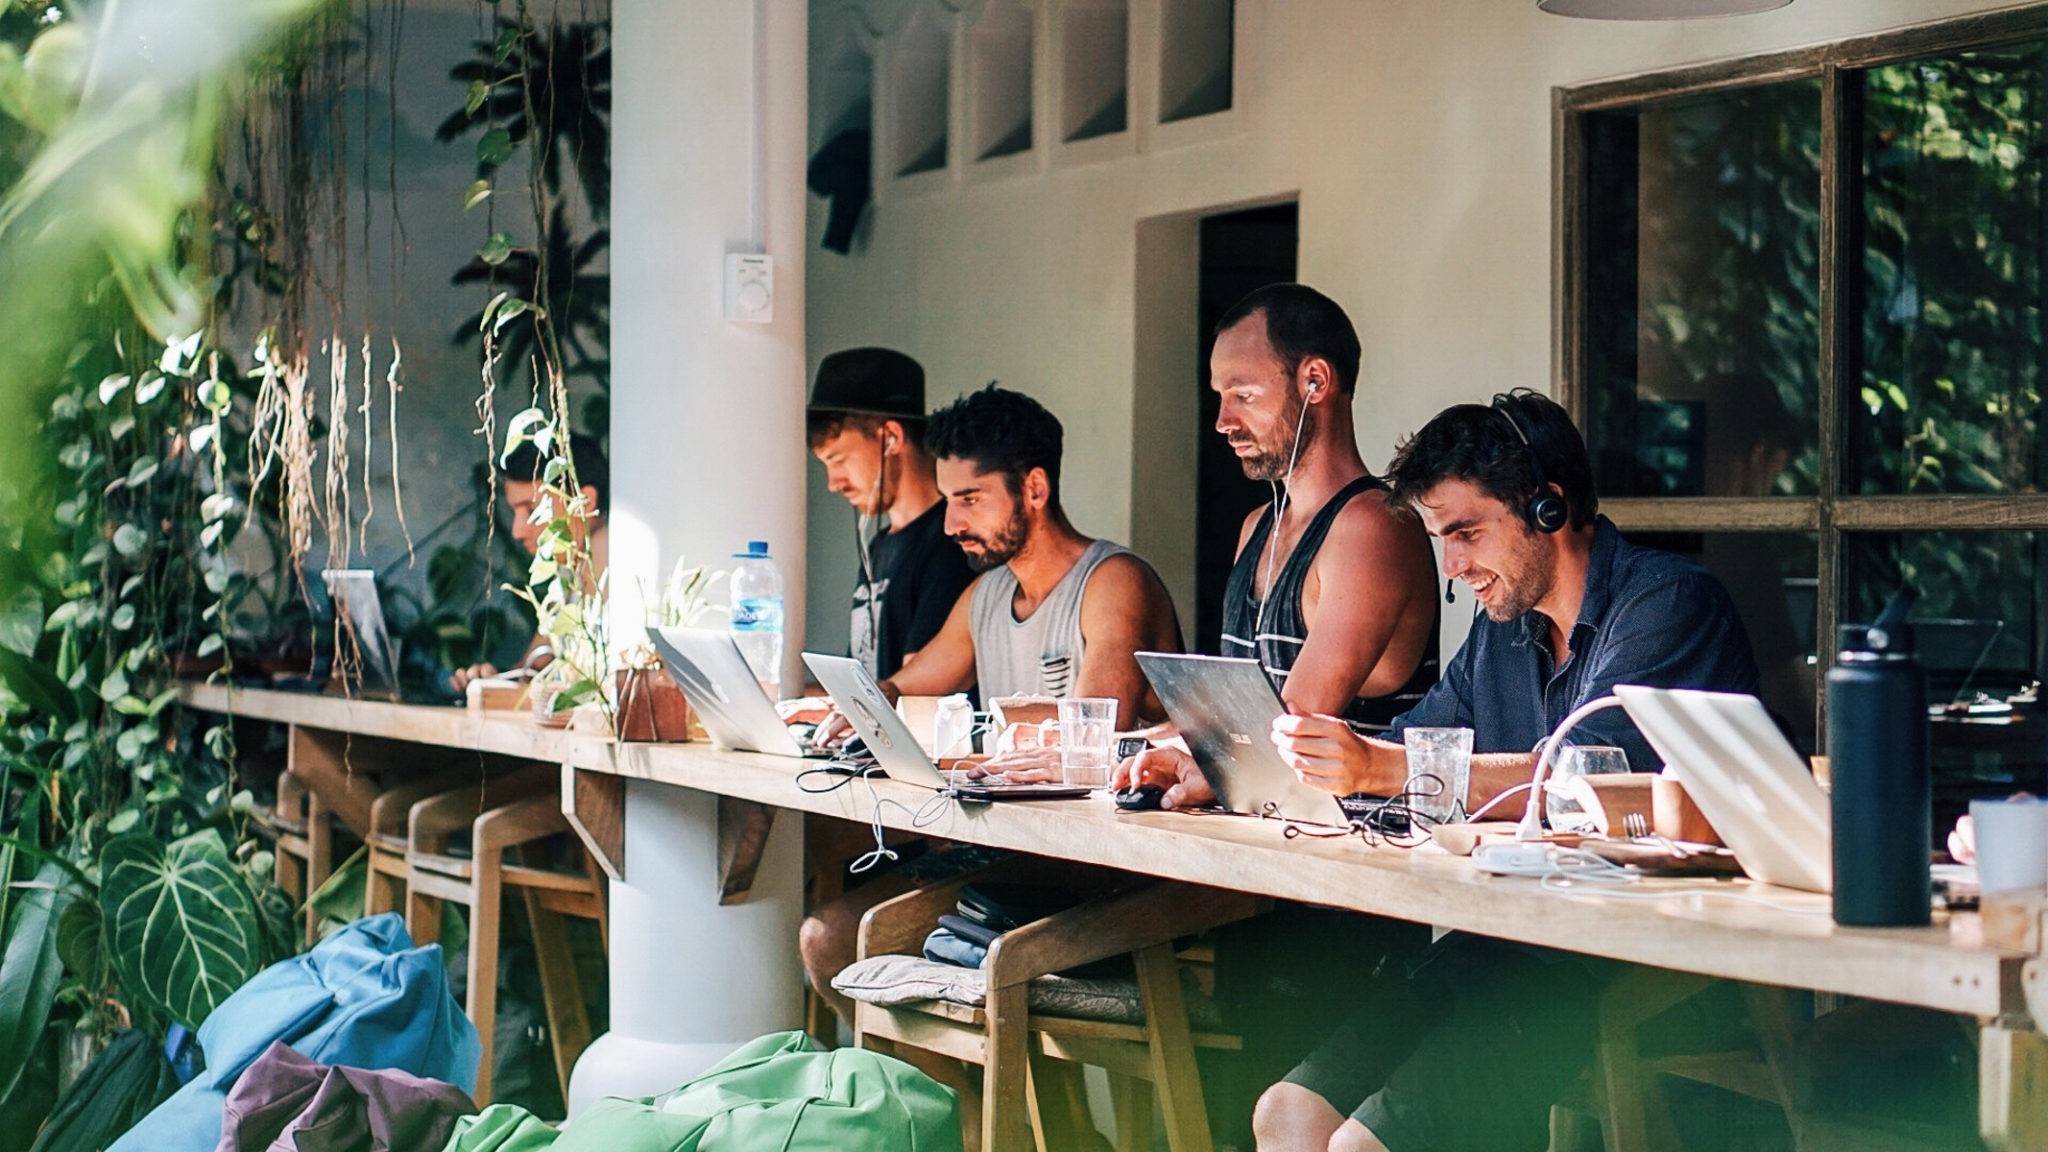 https://www.remotetribe.life/wp-content/uploads/2020/07/Bali-Co-Working-Spaces-Dojo-cover.jpg